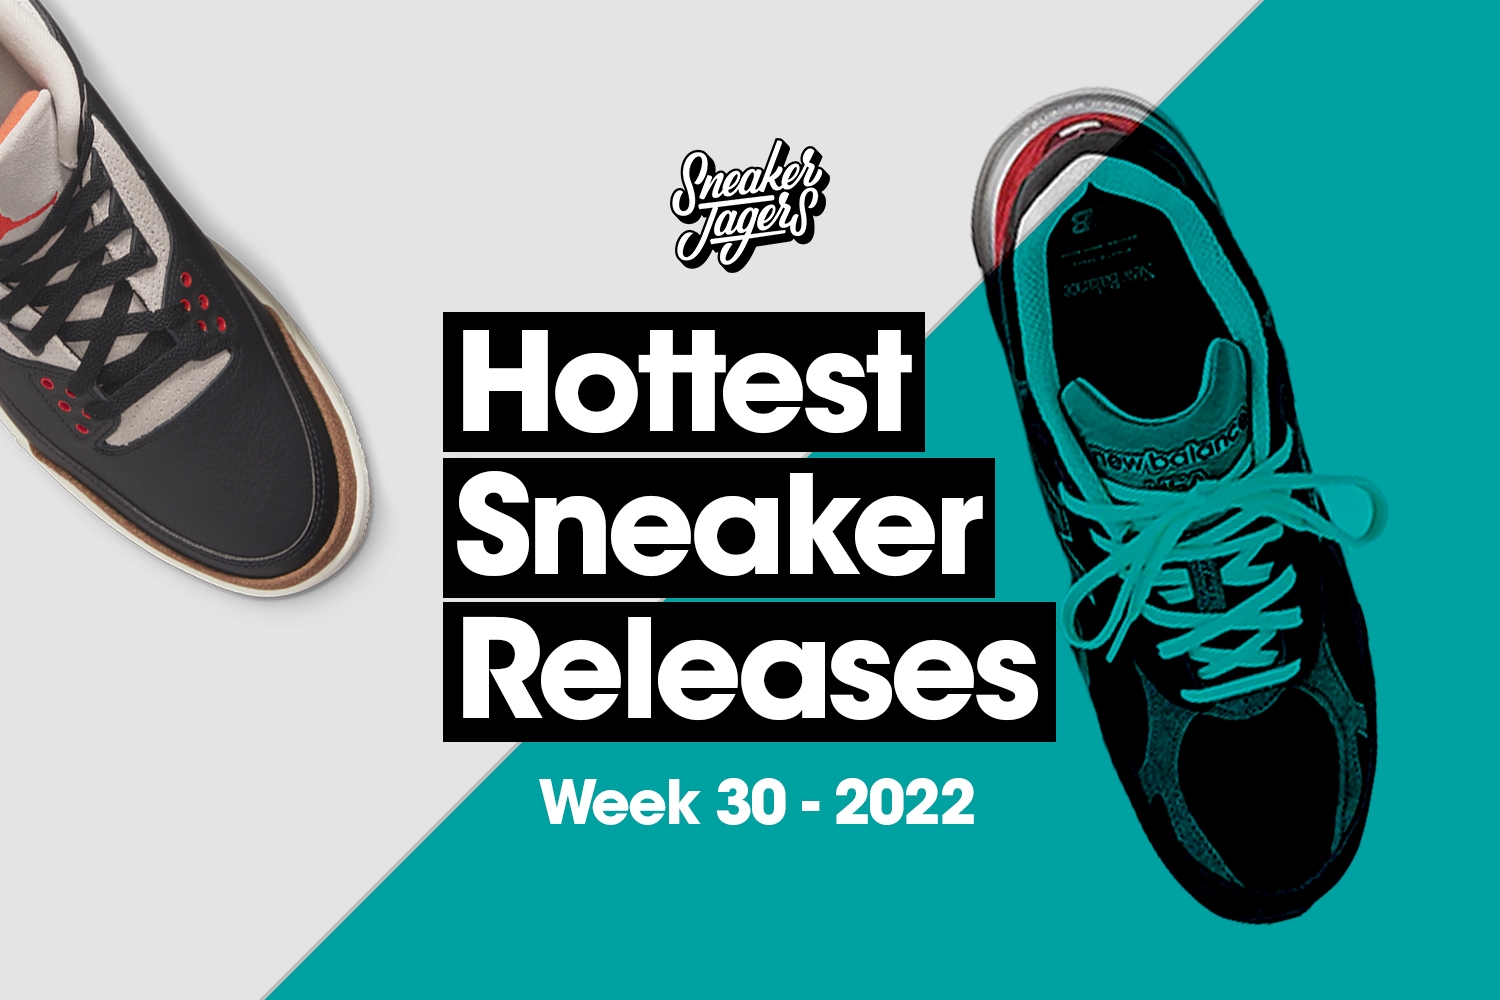 The Hottest Sneaker Releases - Week 30